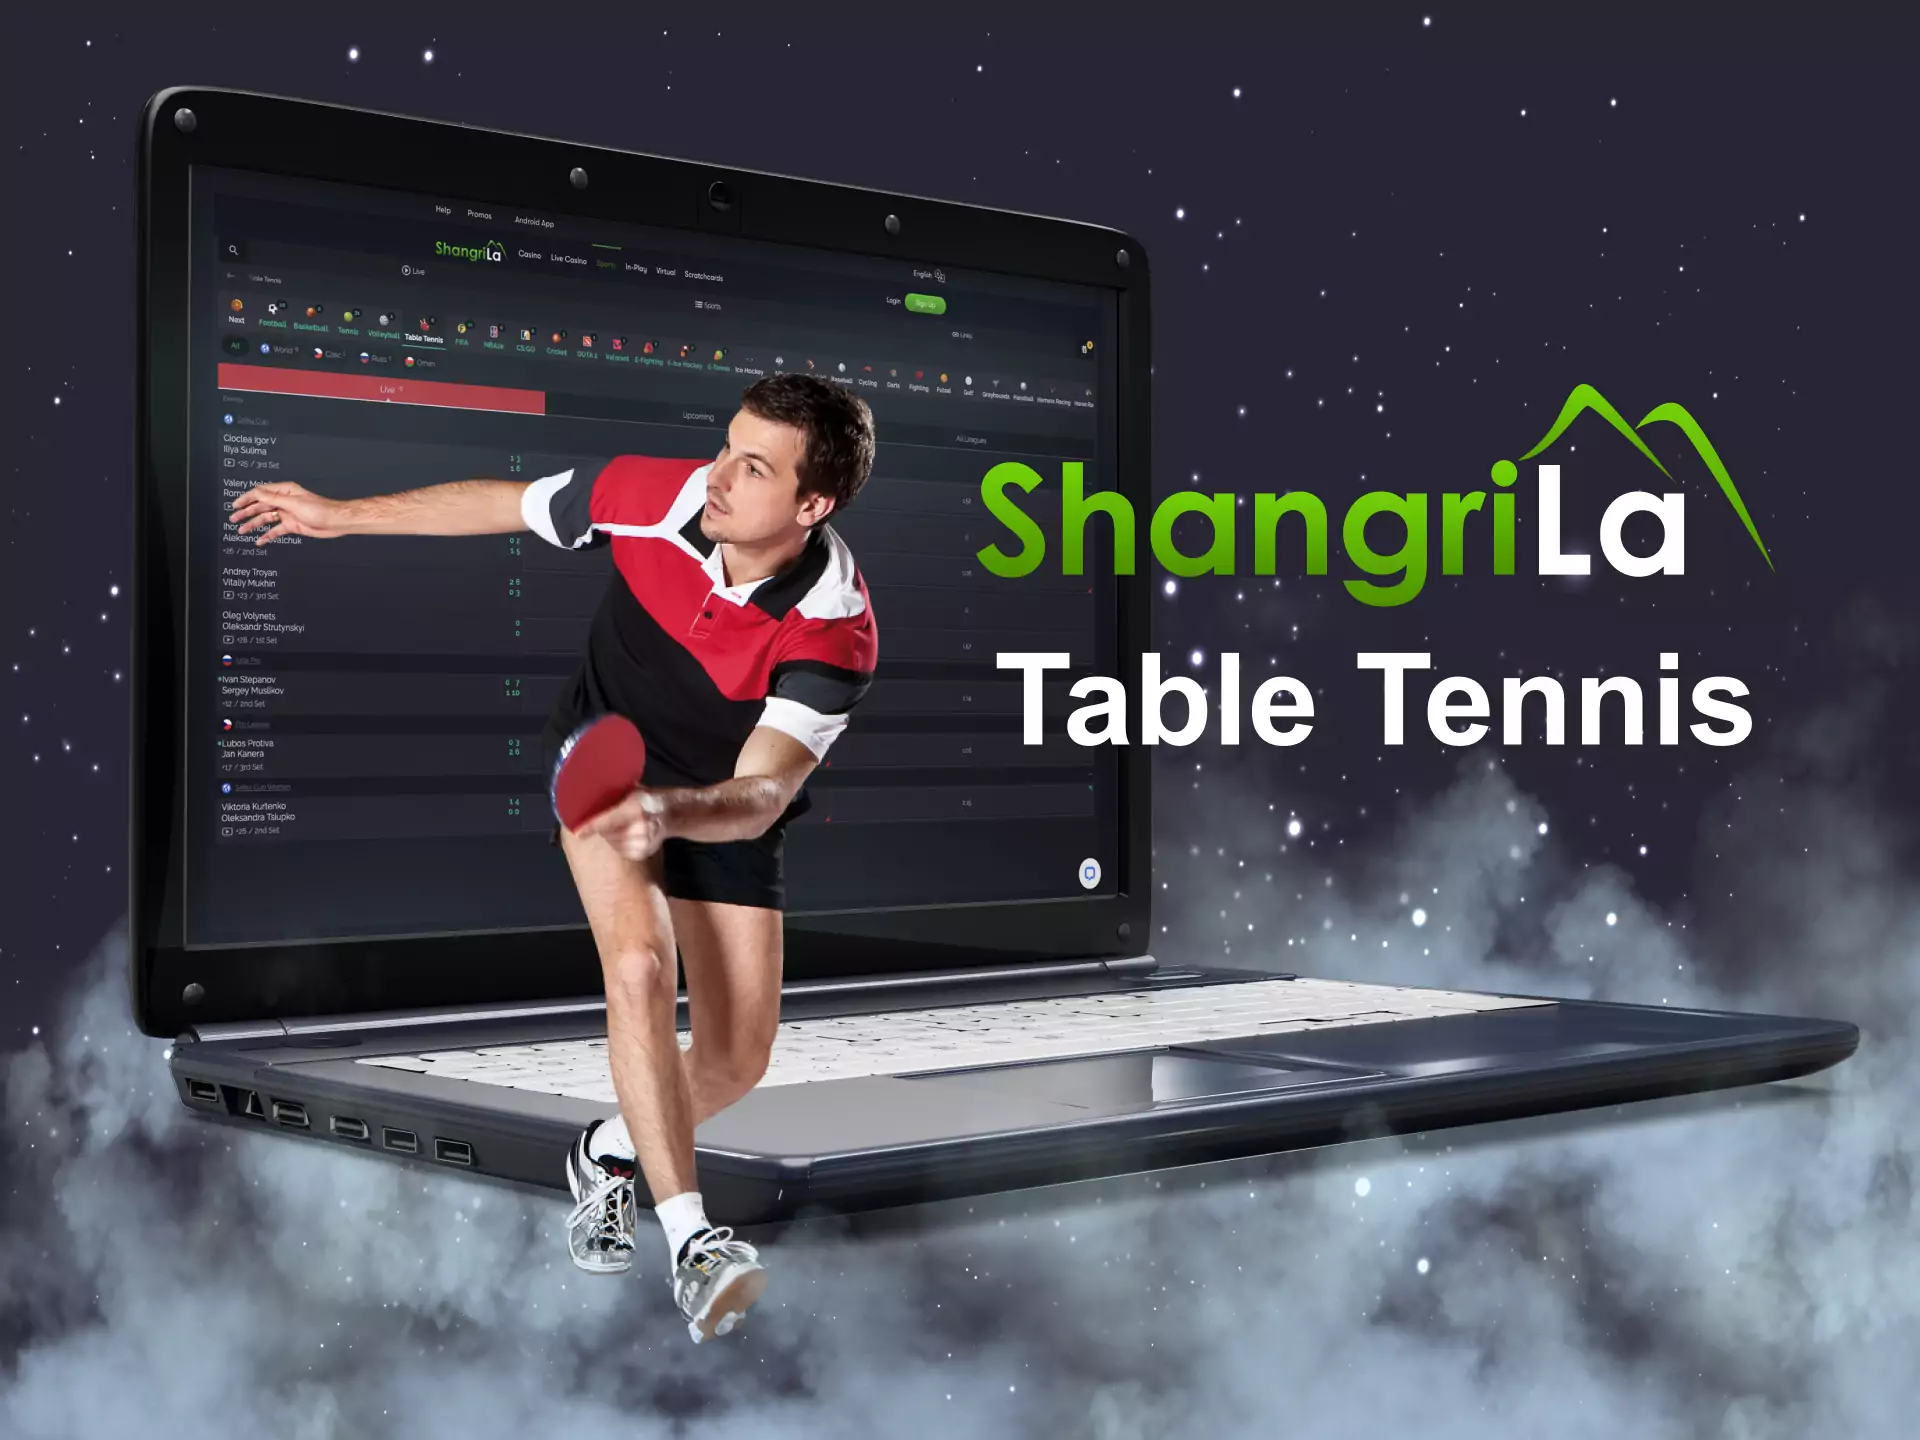 Table tennis events are also presented on the Shangri La website.